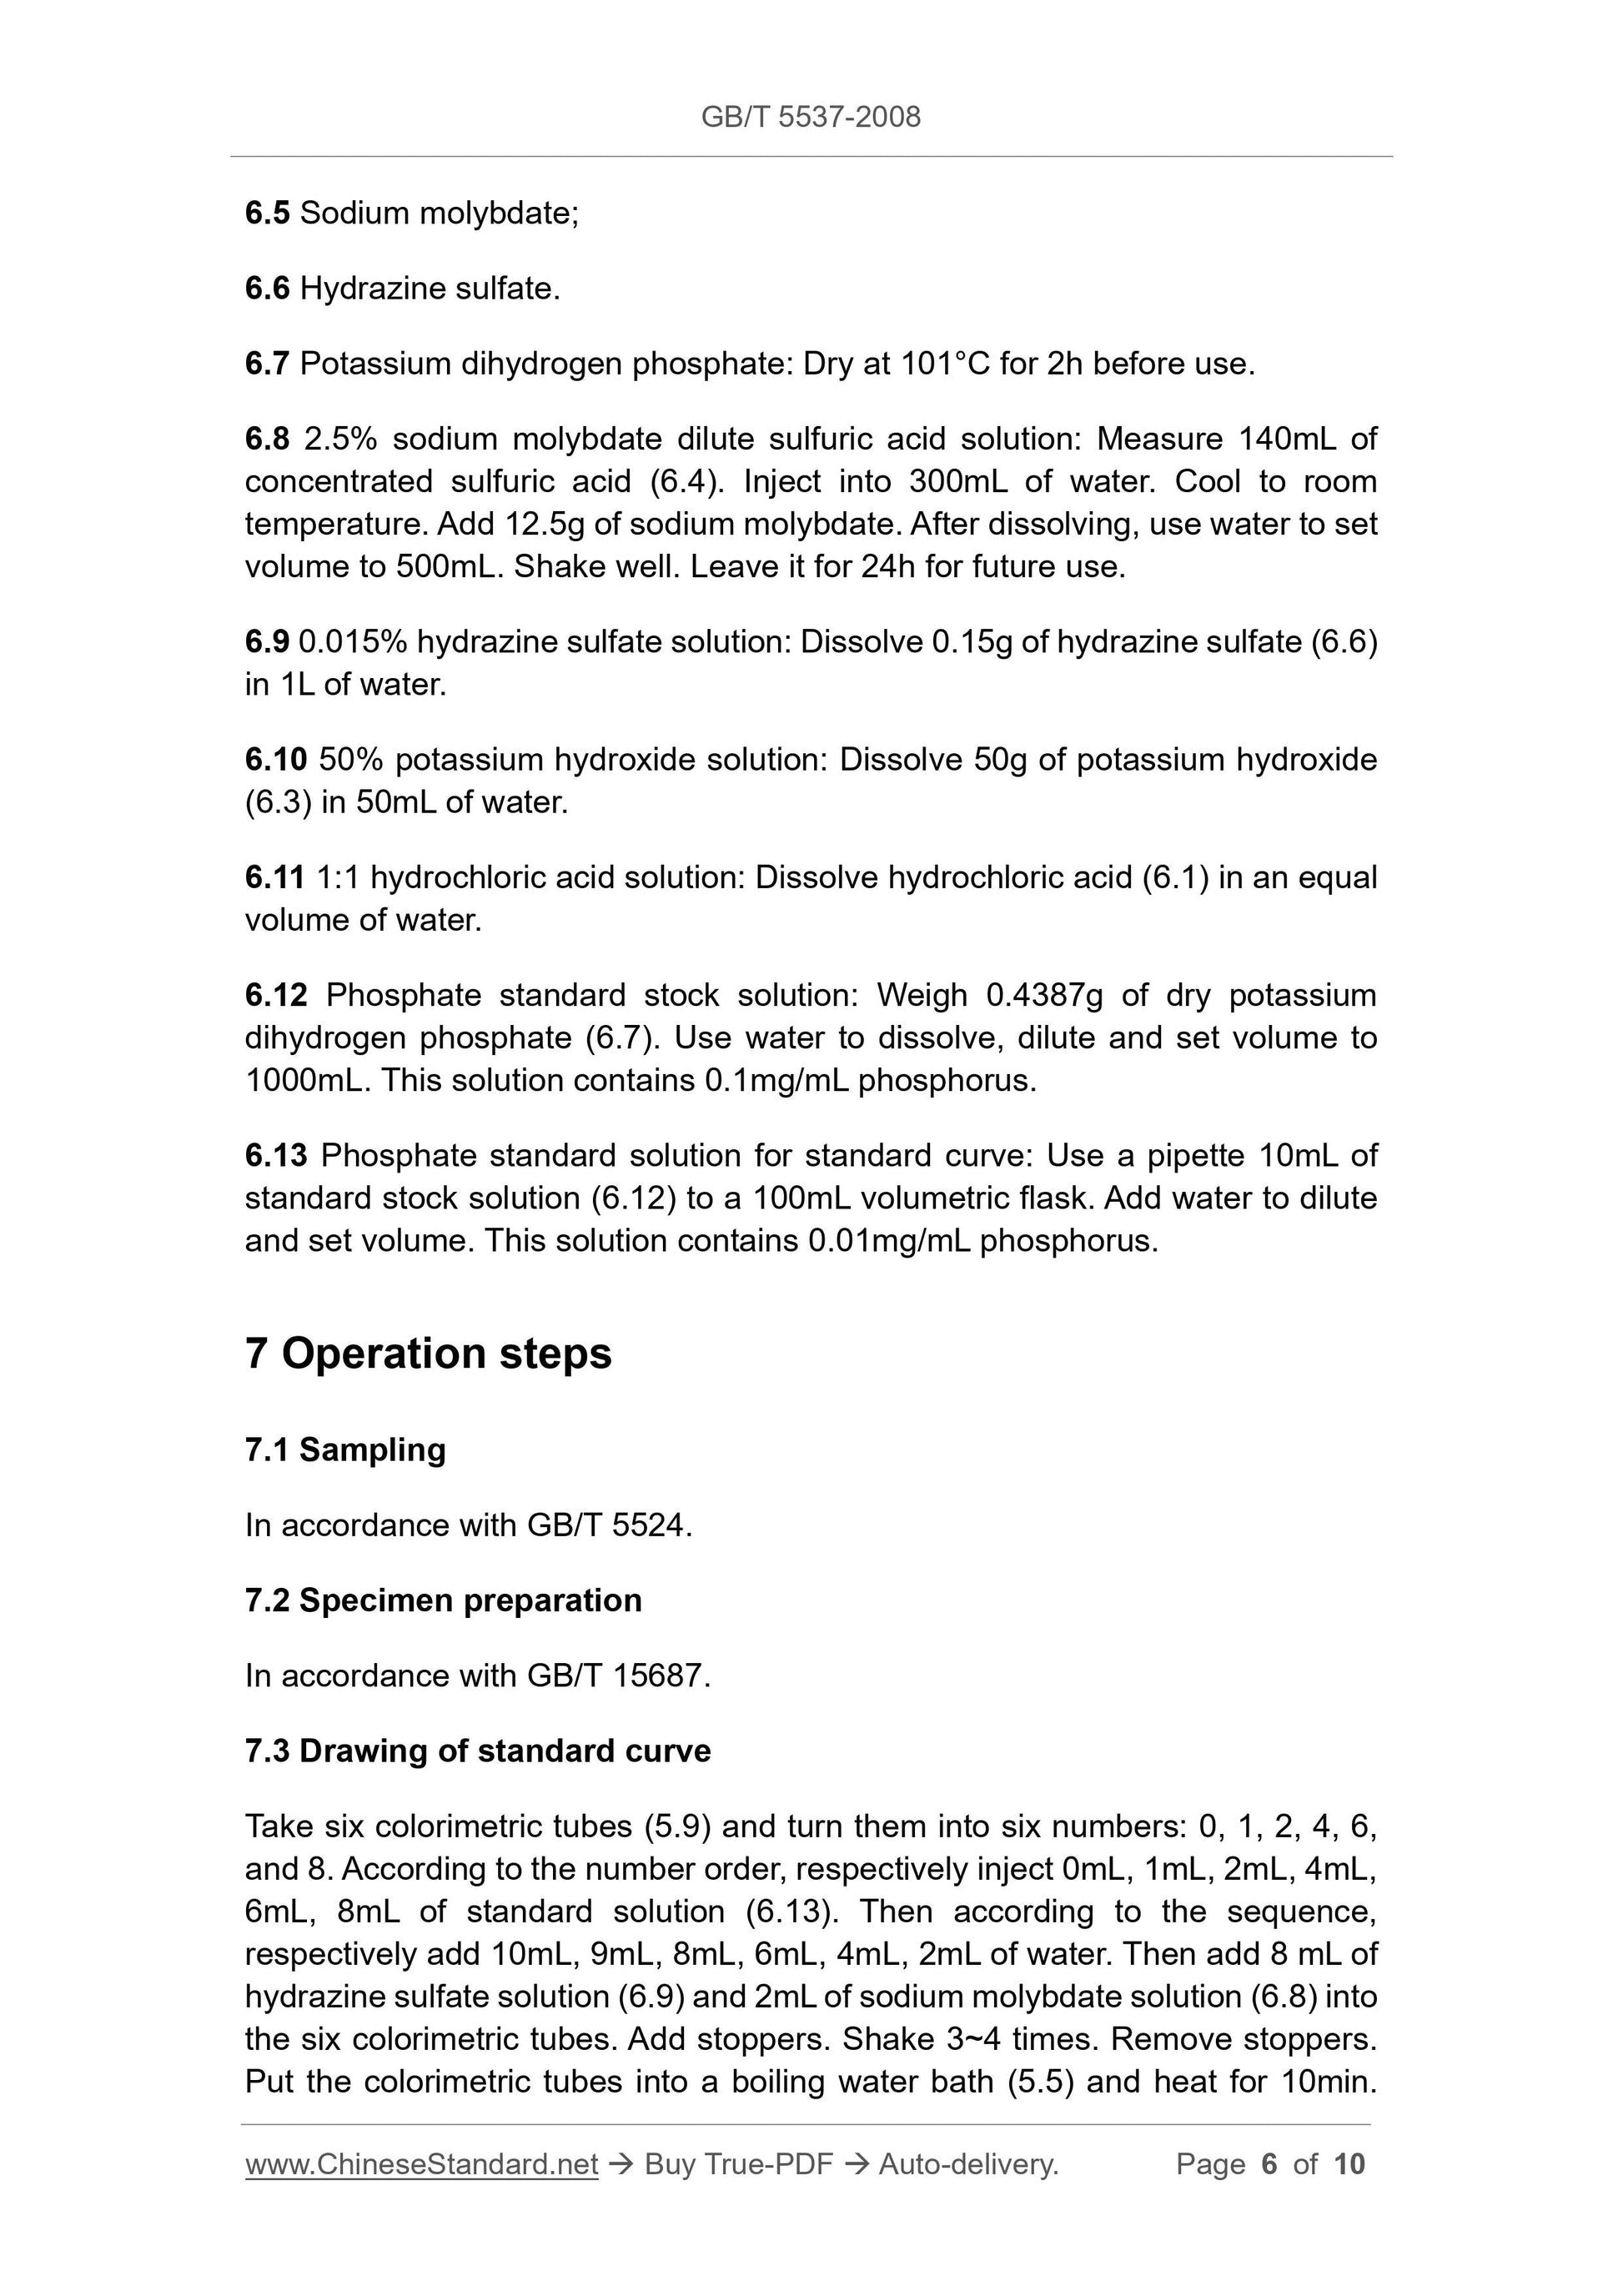 GB/T 5537-2008 Page 4